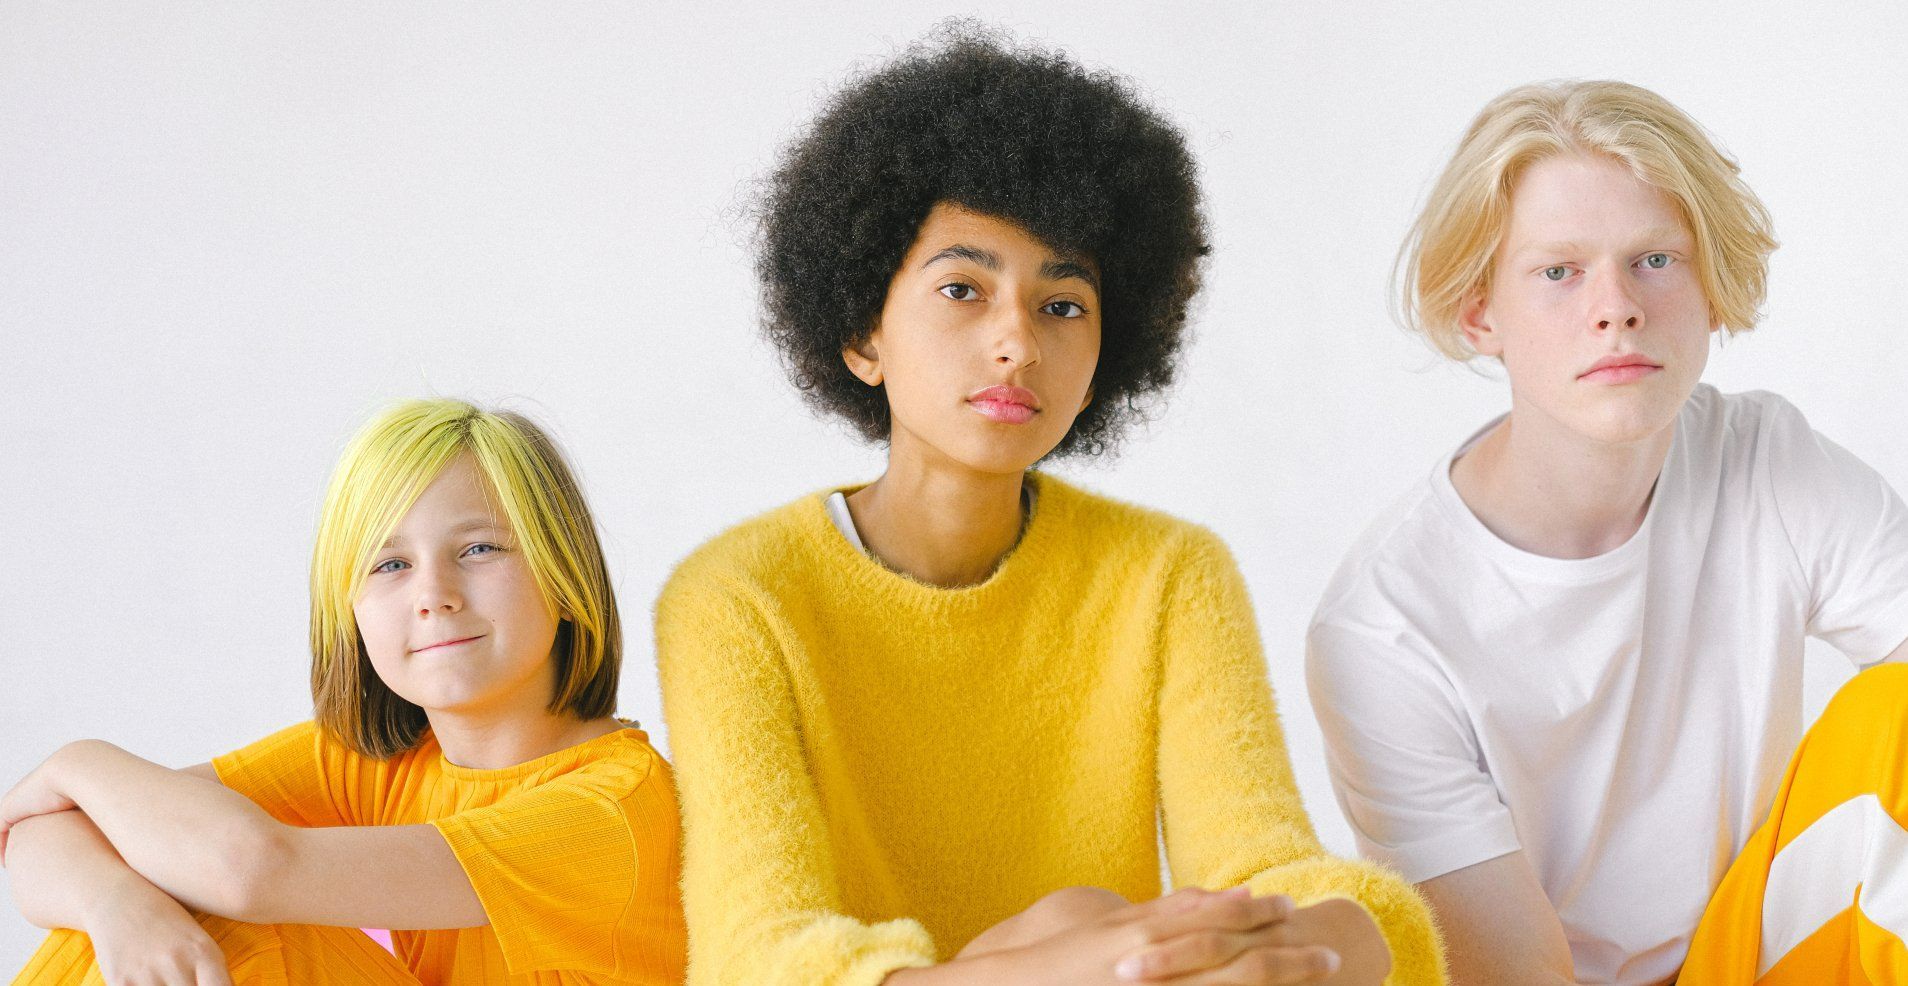 image of 3 teens in yellow and white